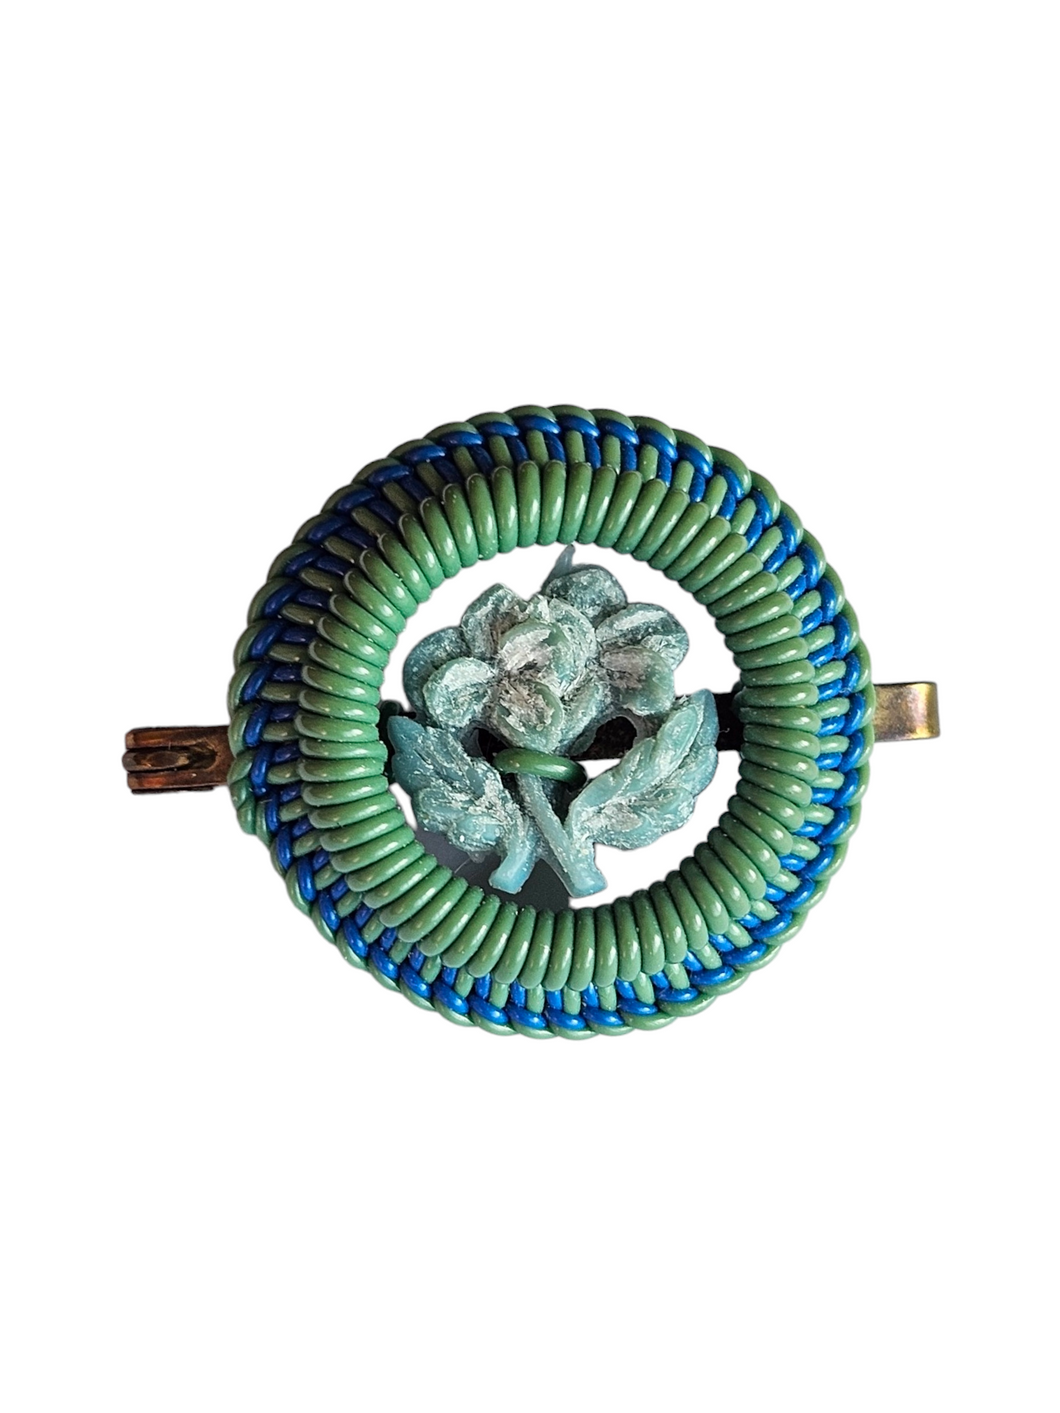 1940s Make Do and Mend Green and Blue Wirework Brooch